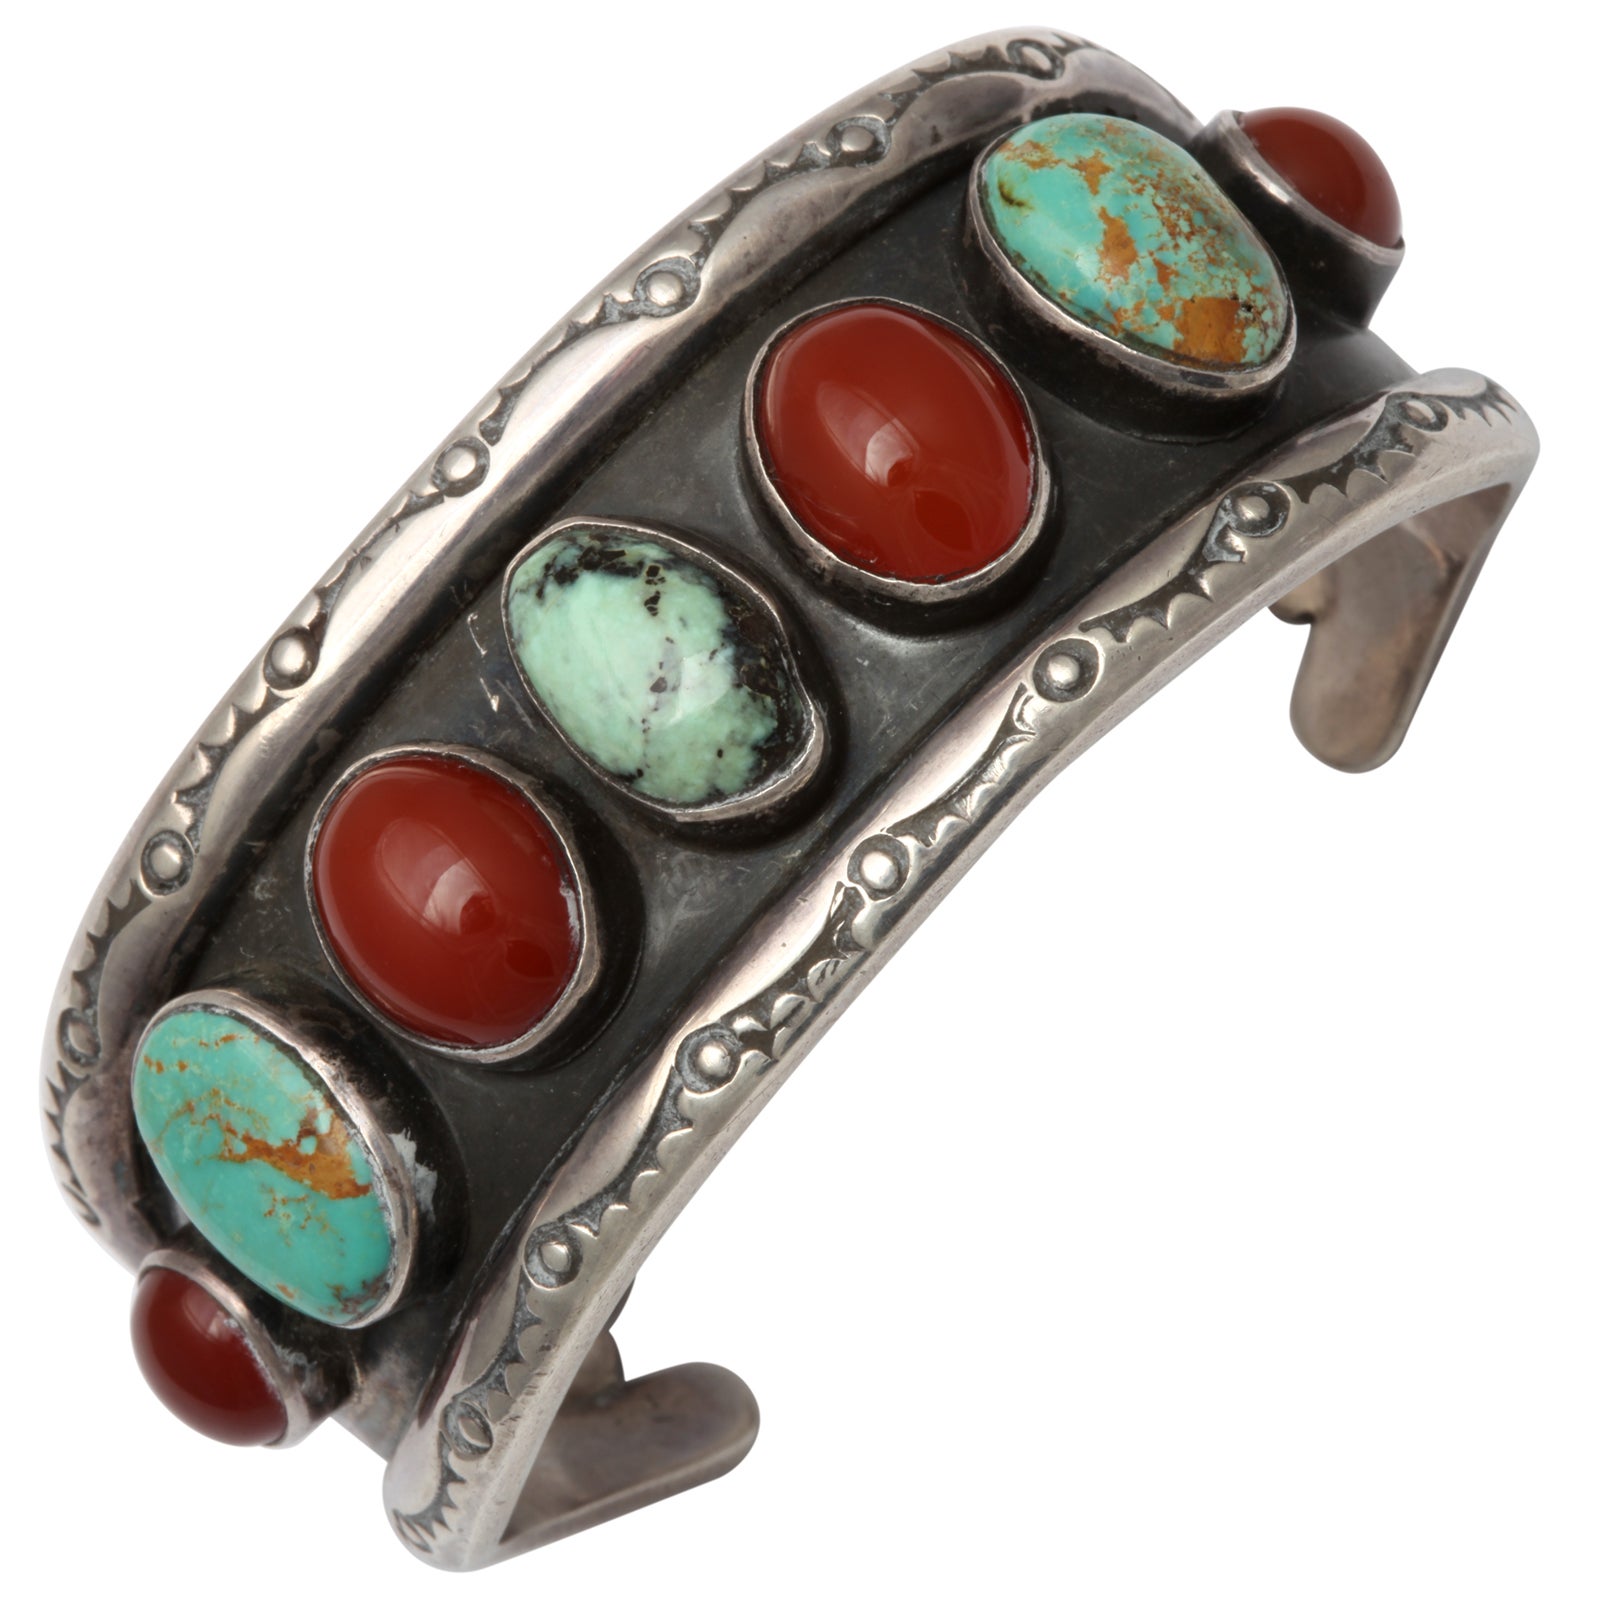 Old Navajo Cuff of Matrix Turquoise and Carnelian